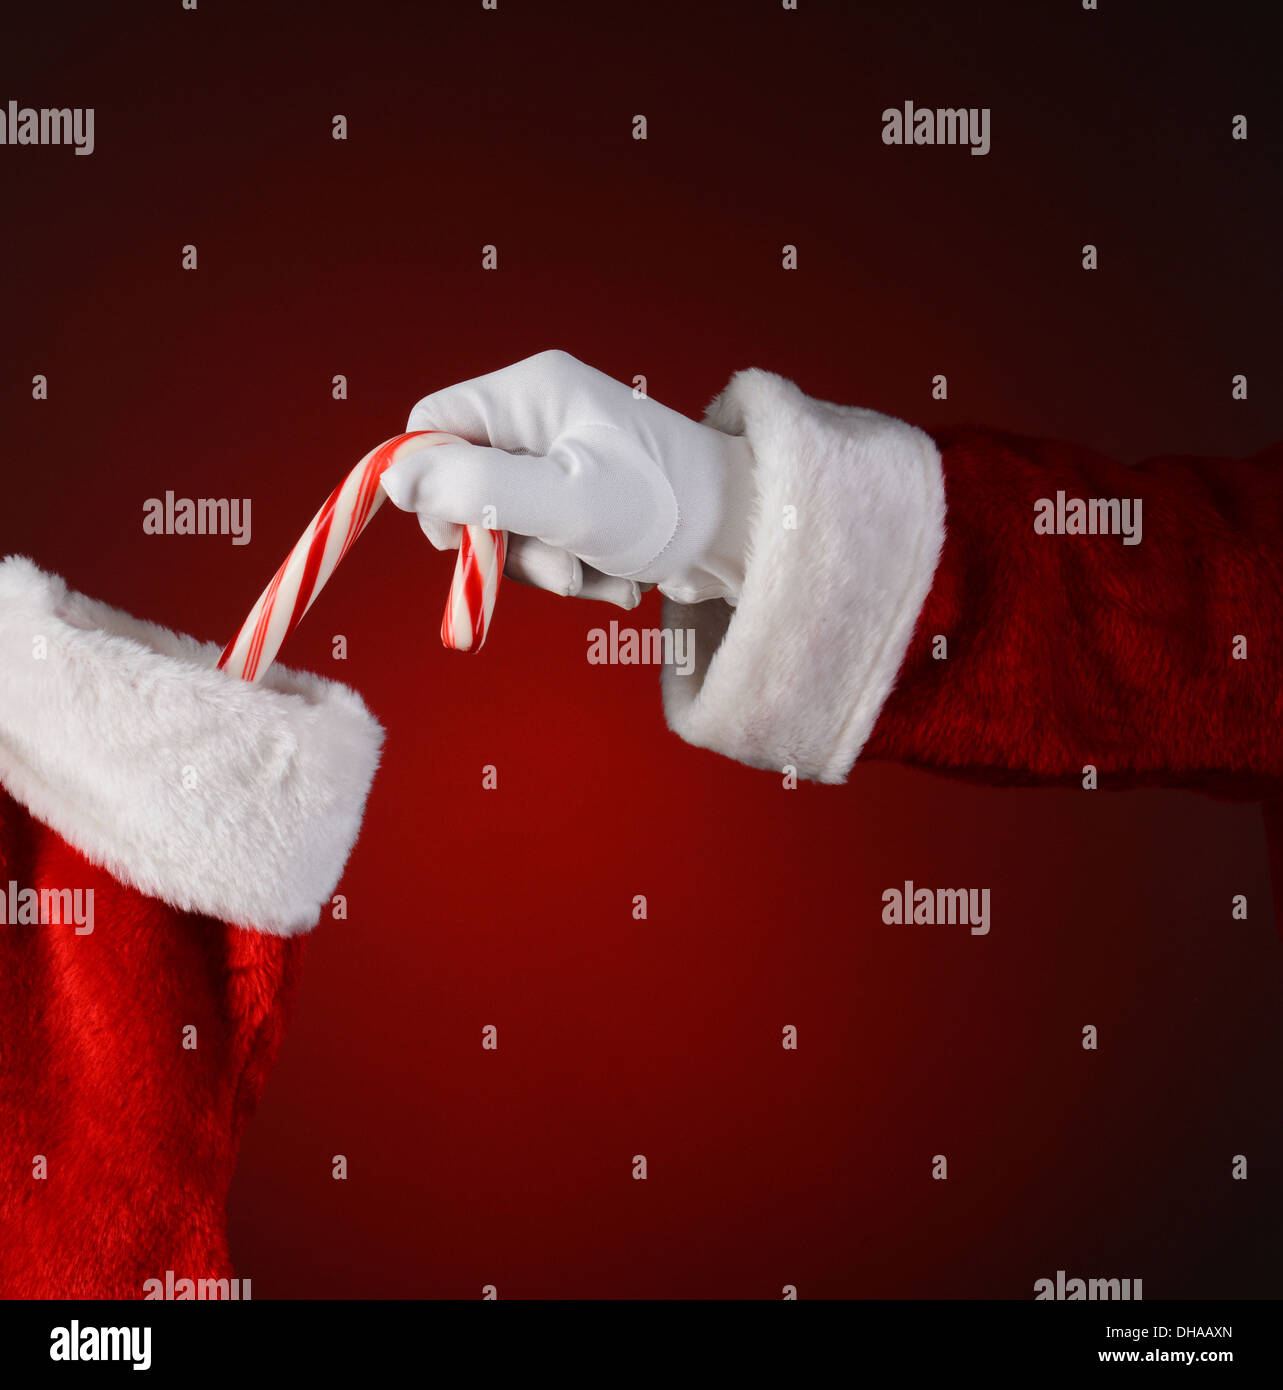 Closeup of Santa Claus placing a candy cane into a holiday stocking. Square format on a light to dark red spot background. Stock Photo